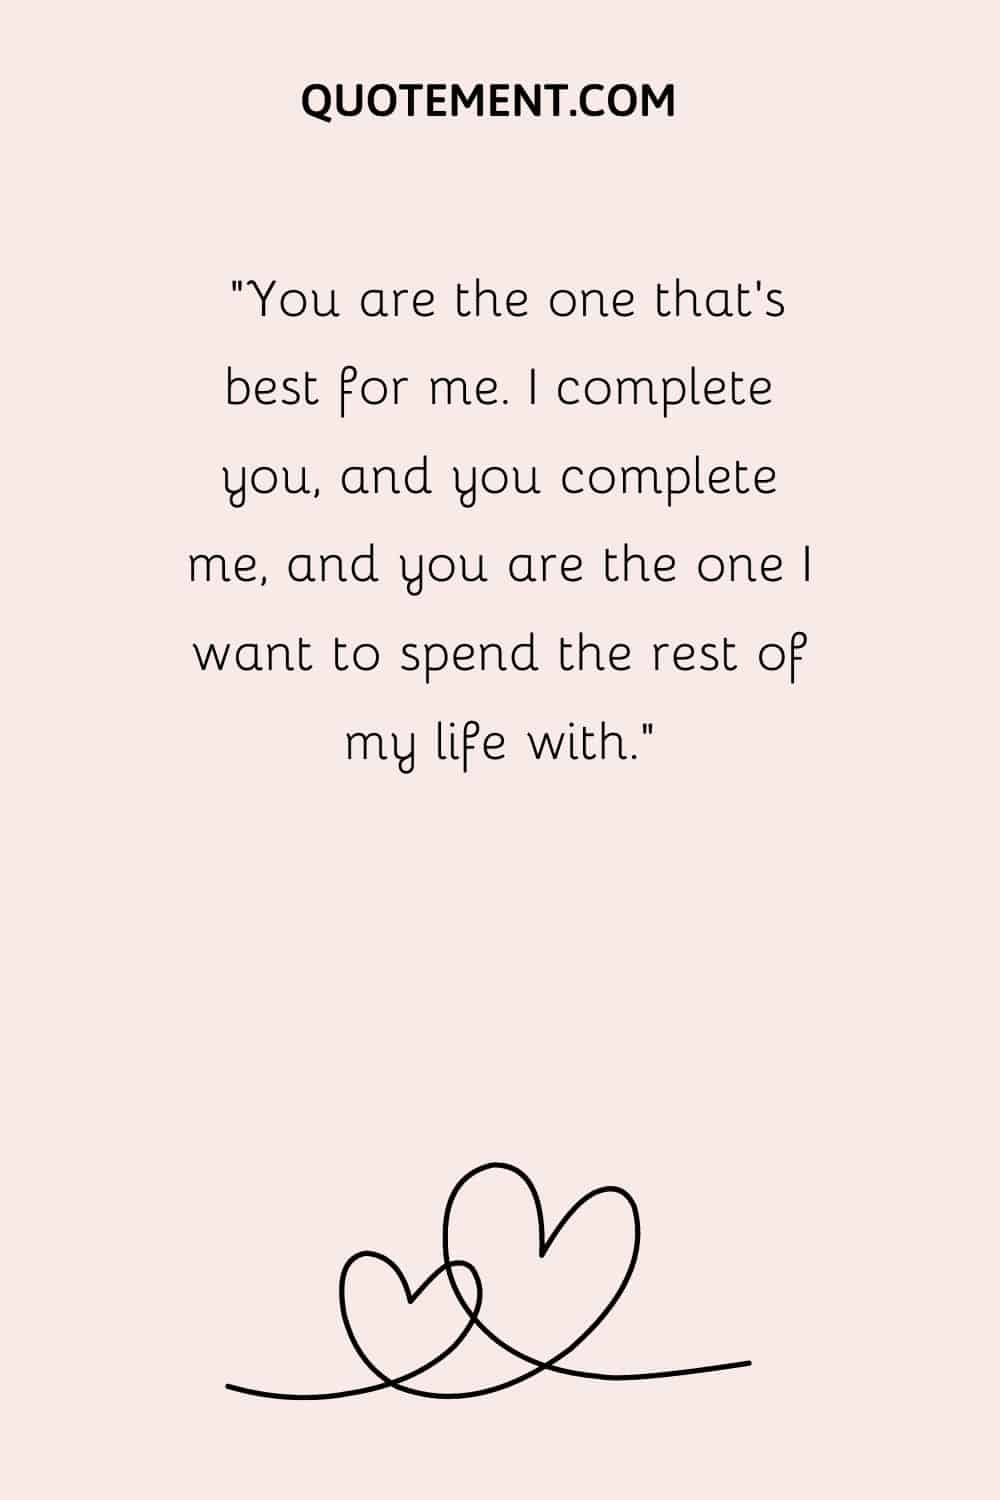 “You are the one that’s best for me. I complete you, and you complete me, and you are the one I want to spend the rest of my life with.”